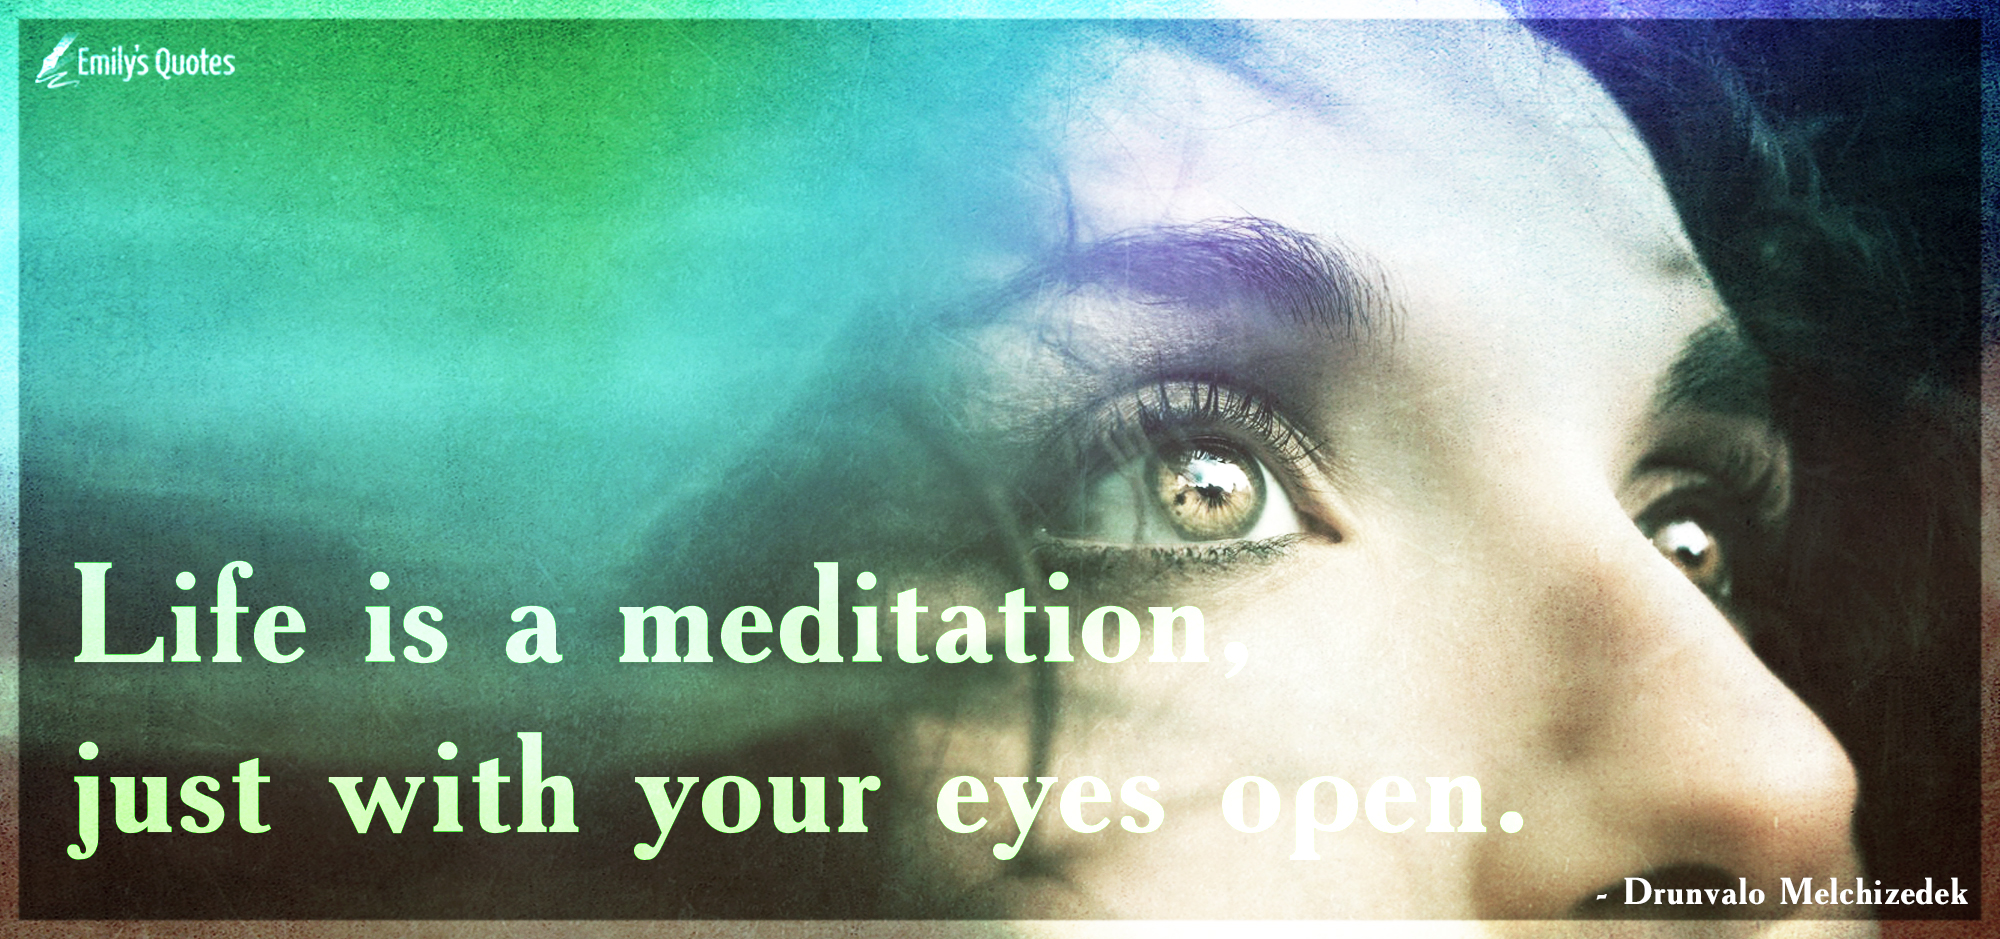 Life is a meditation, just with your eyes open